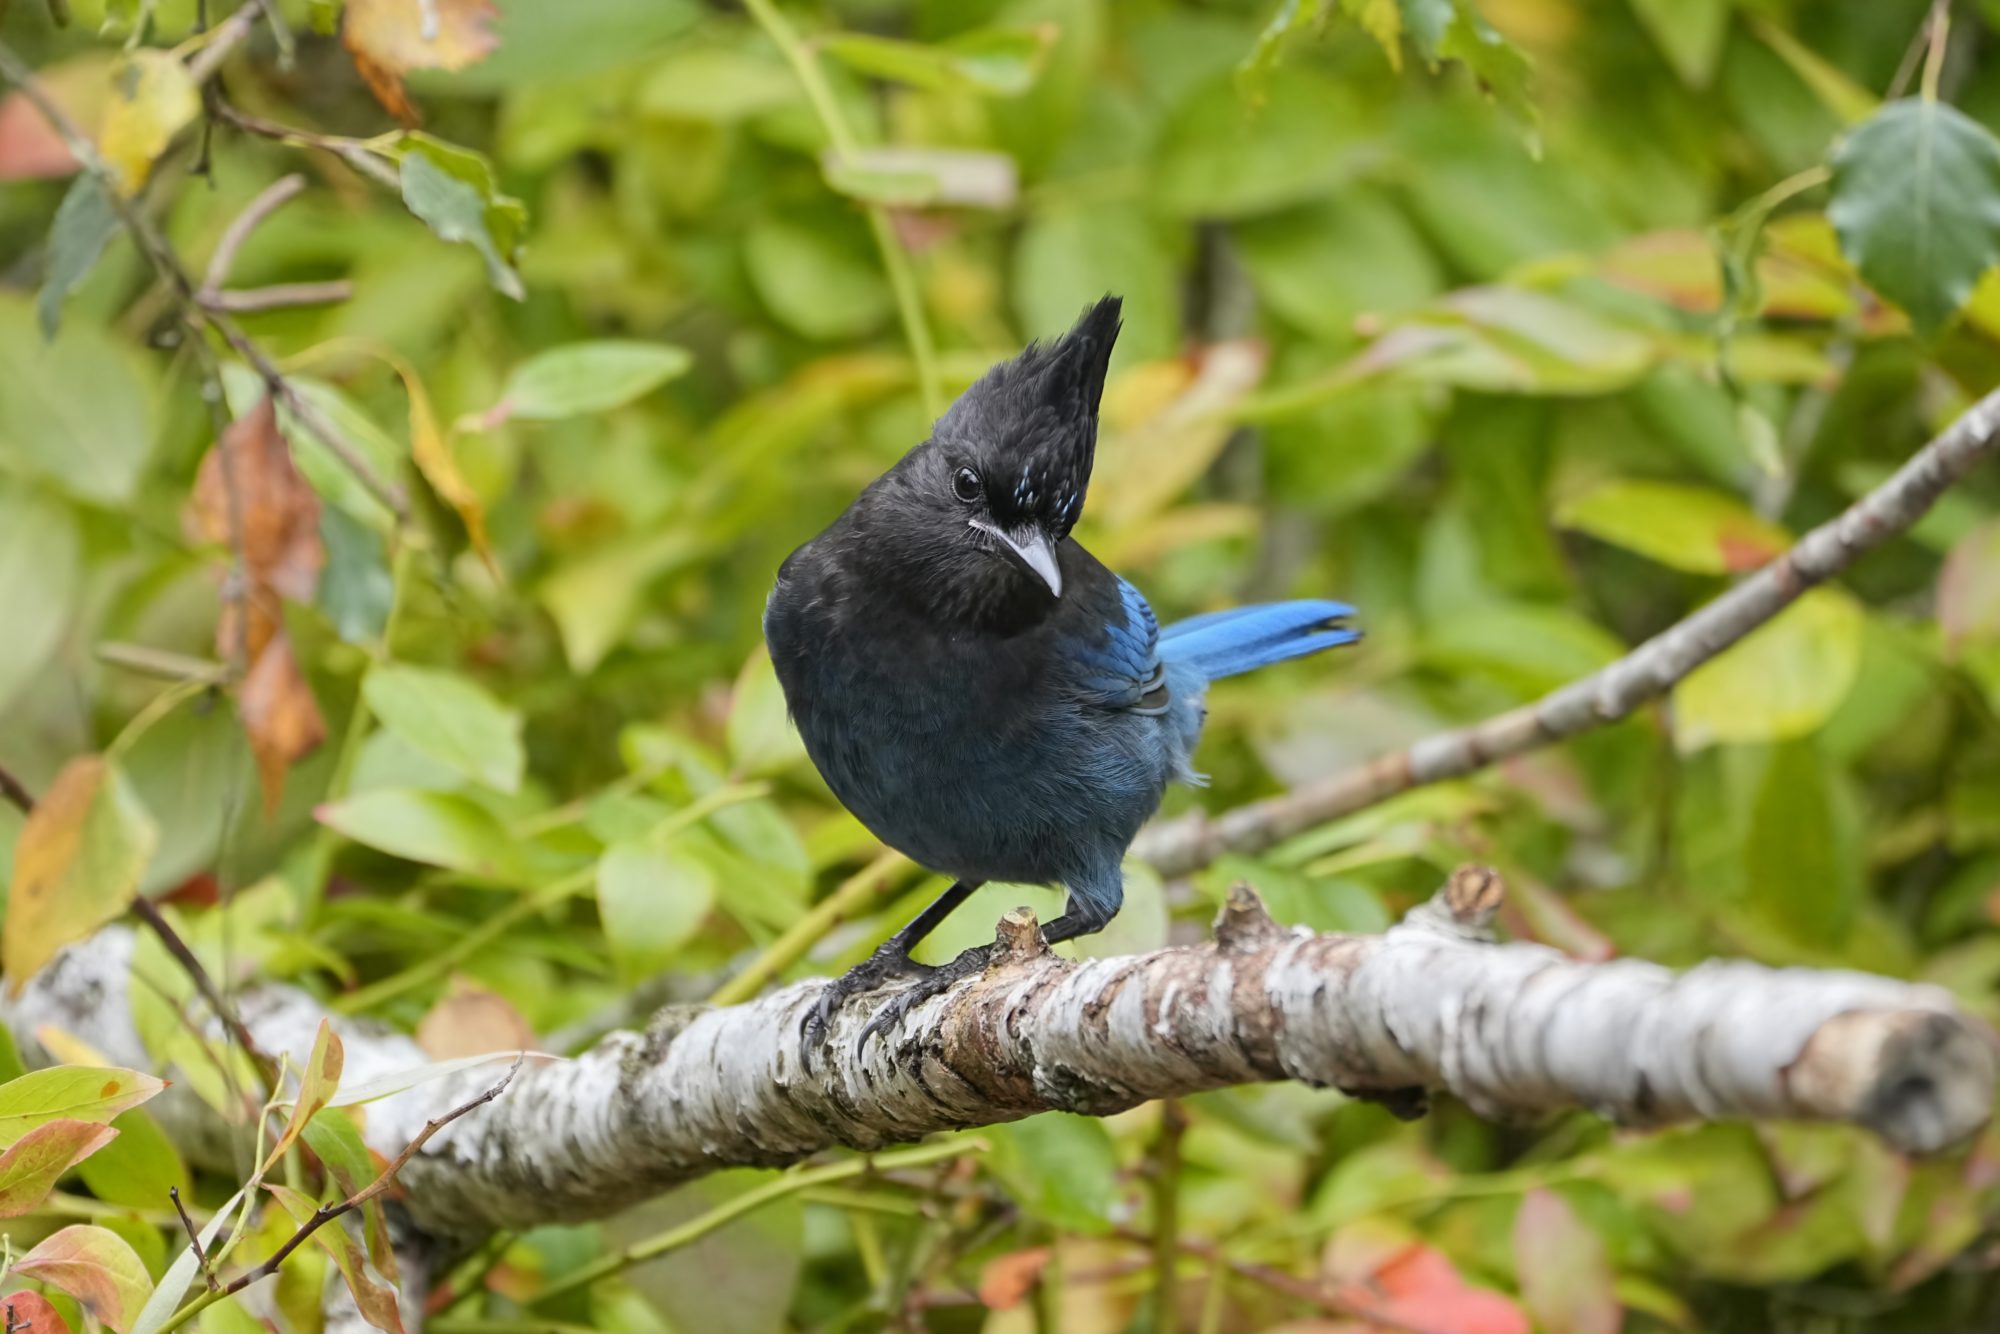 A Steller's Jay sitting on a branch, looking down